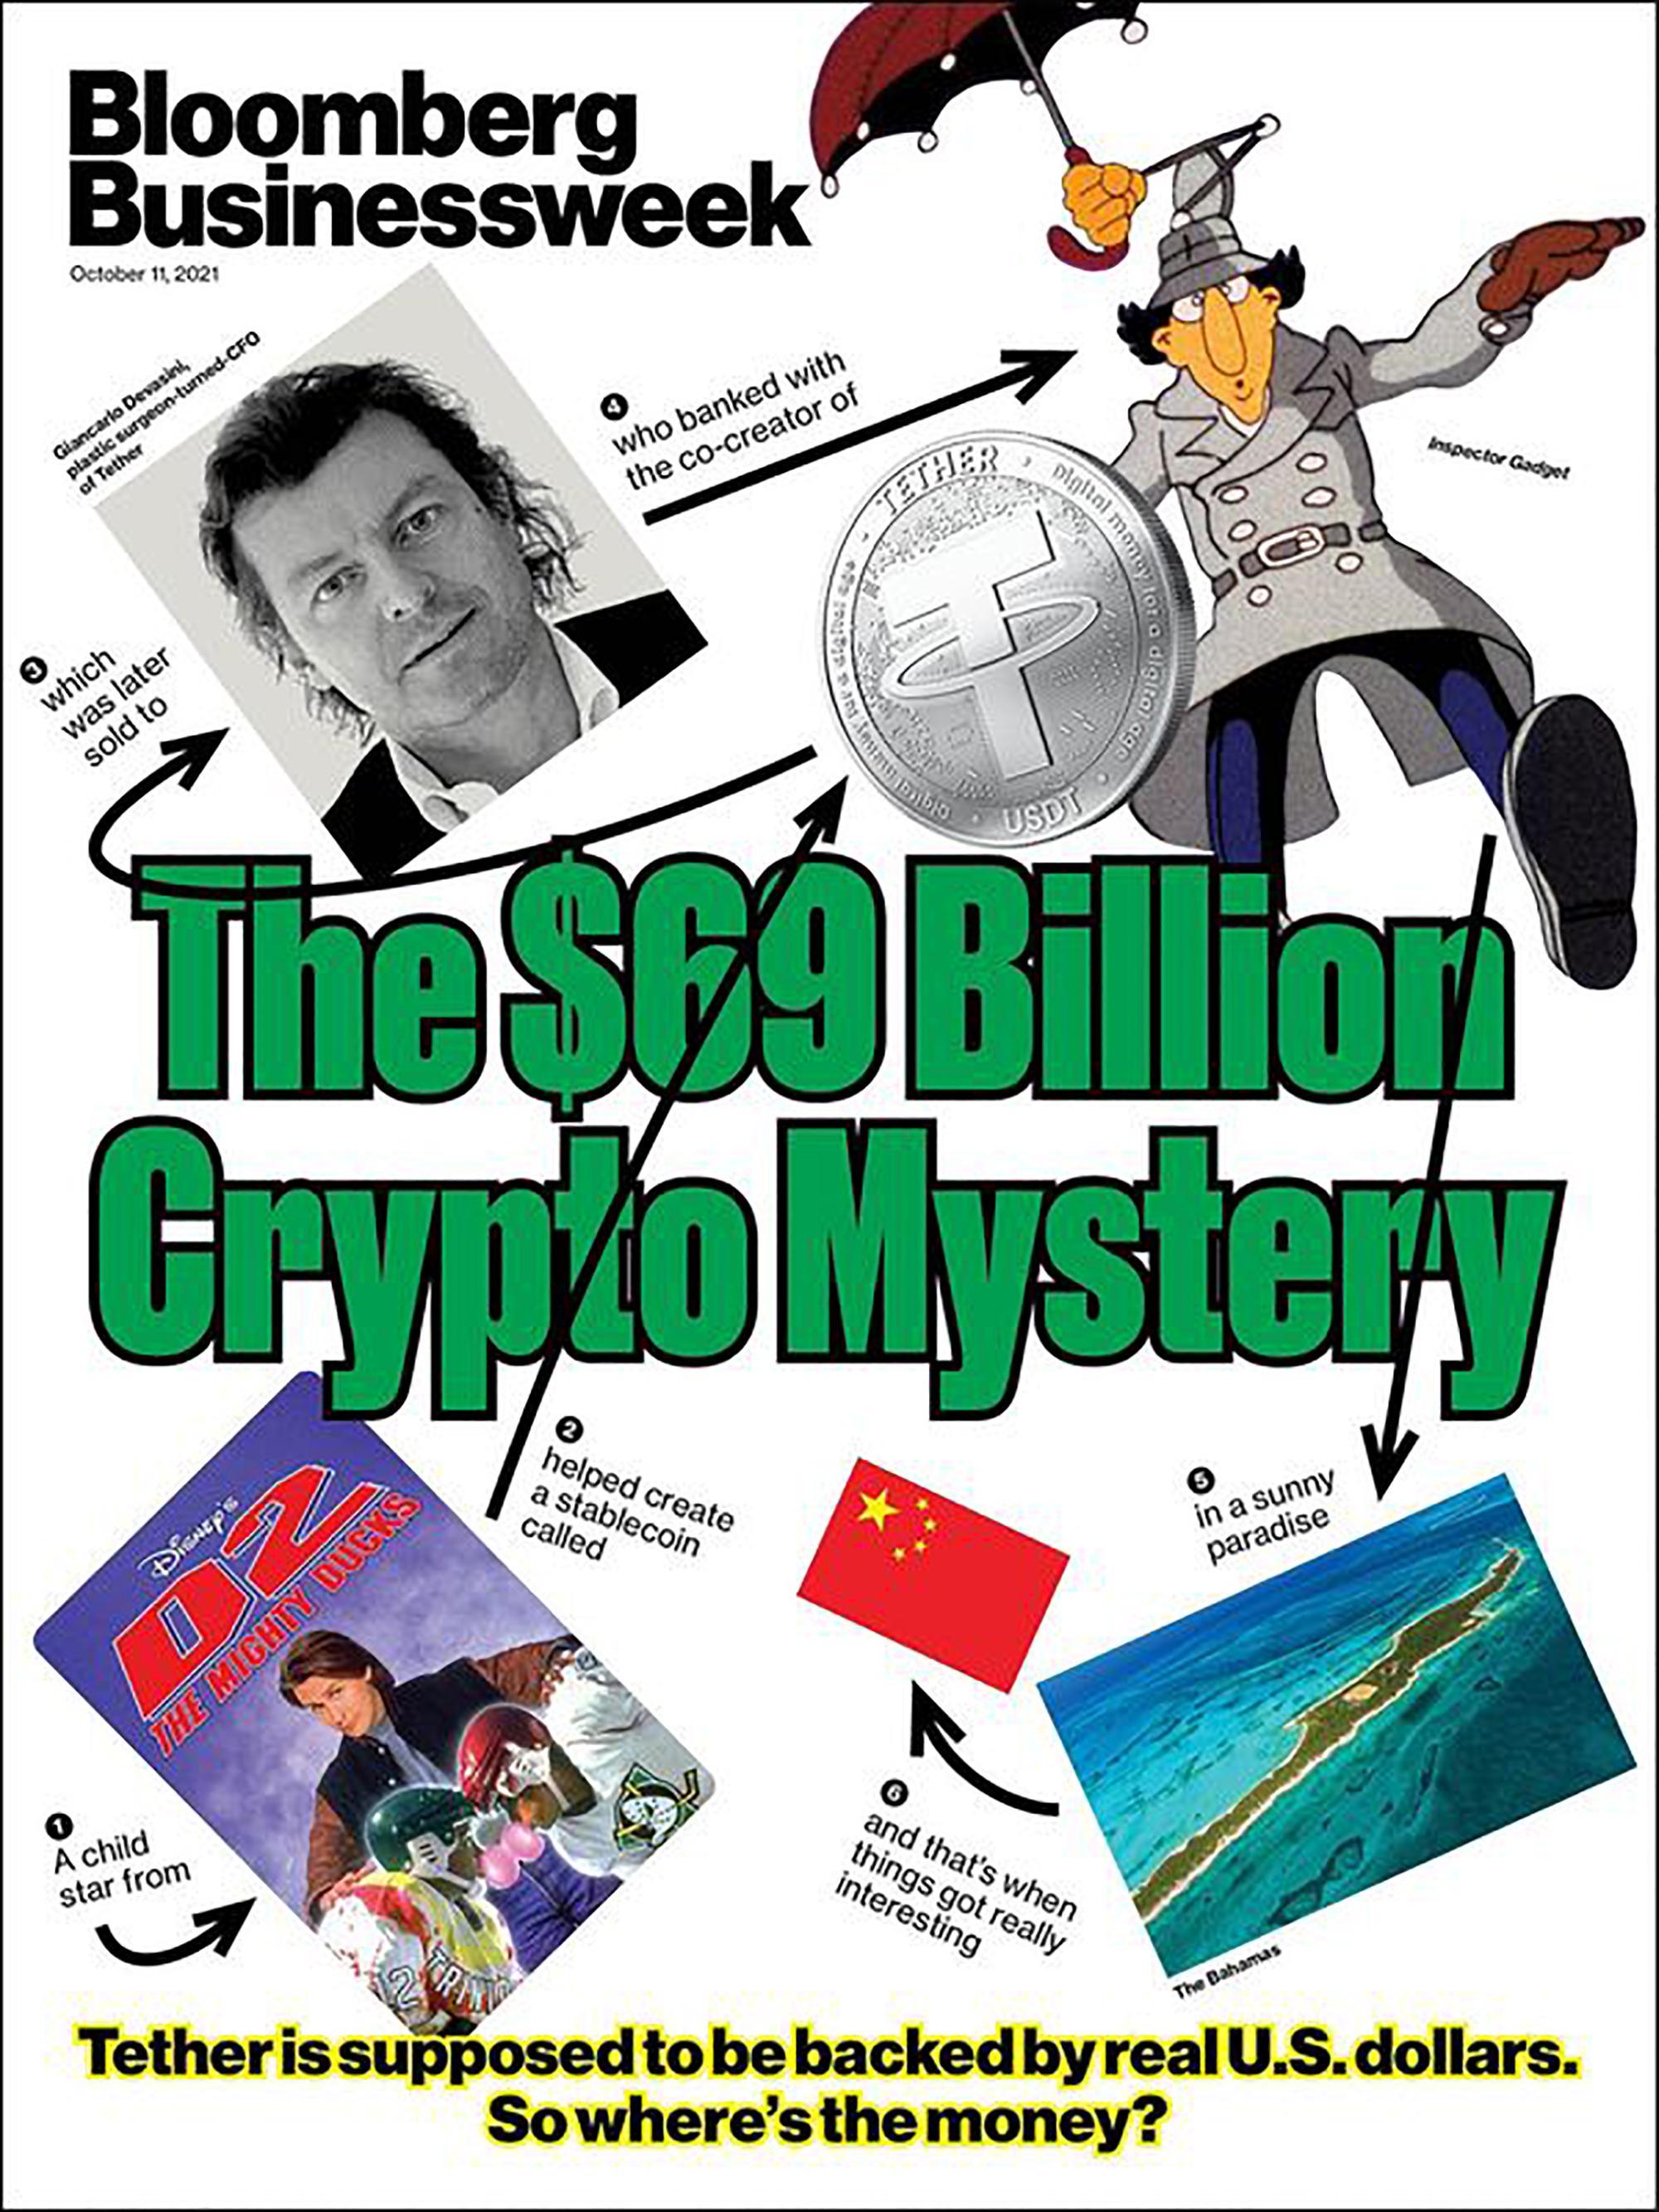 The owner of Tether and Bitfinex, Giancarlo Devasini, on the cover of Bloomberg Businessweek in October 2021. In February 2022 he opened a chapter of Bitfinex in El Salvador. The company will issue one billion dollars' worth of Bitcoin Bonds and the Salvadoran government says it will accept dollars, bitcoin, and tether as payment.